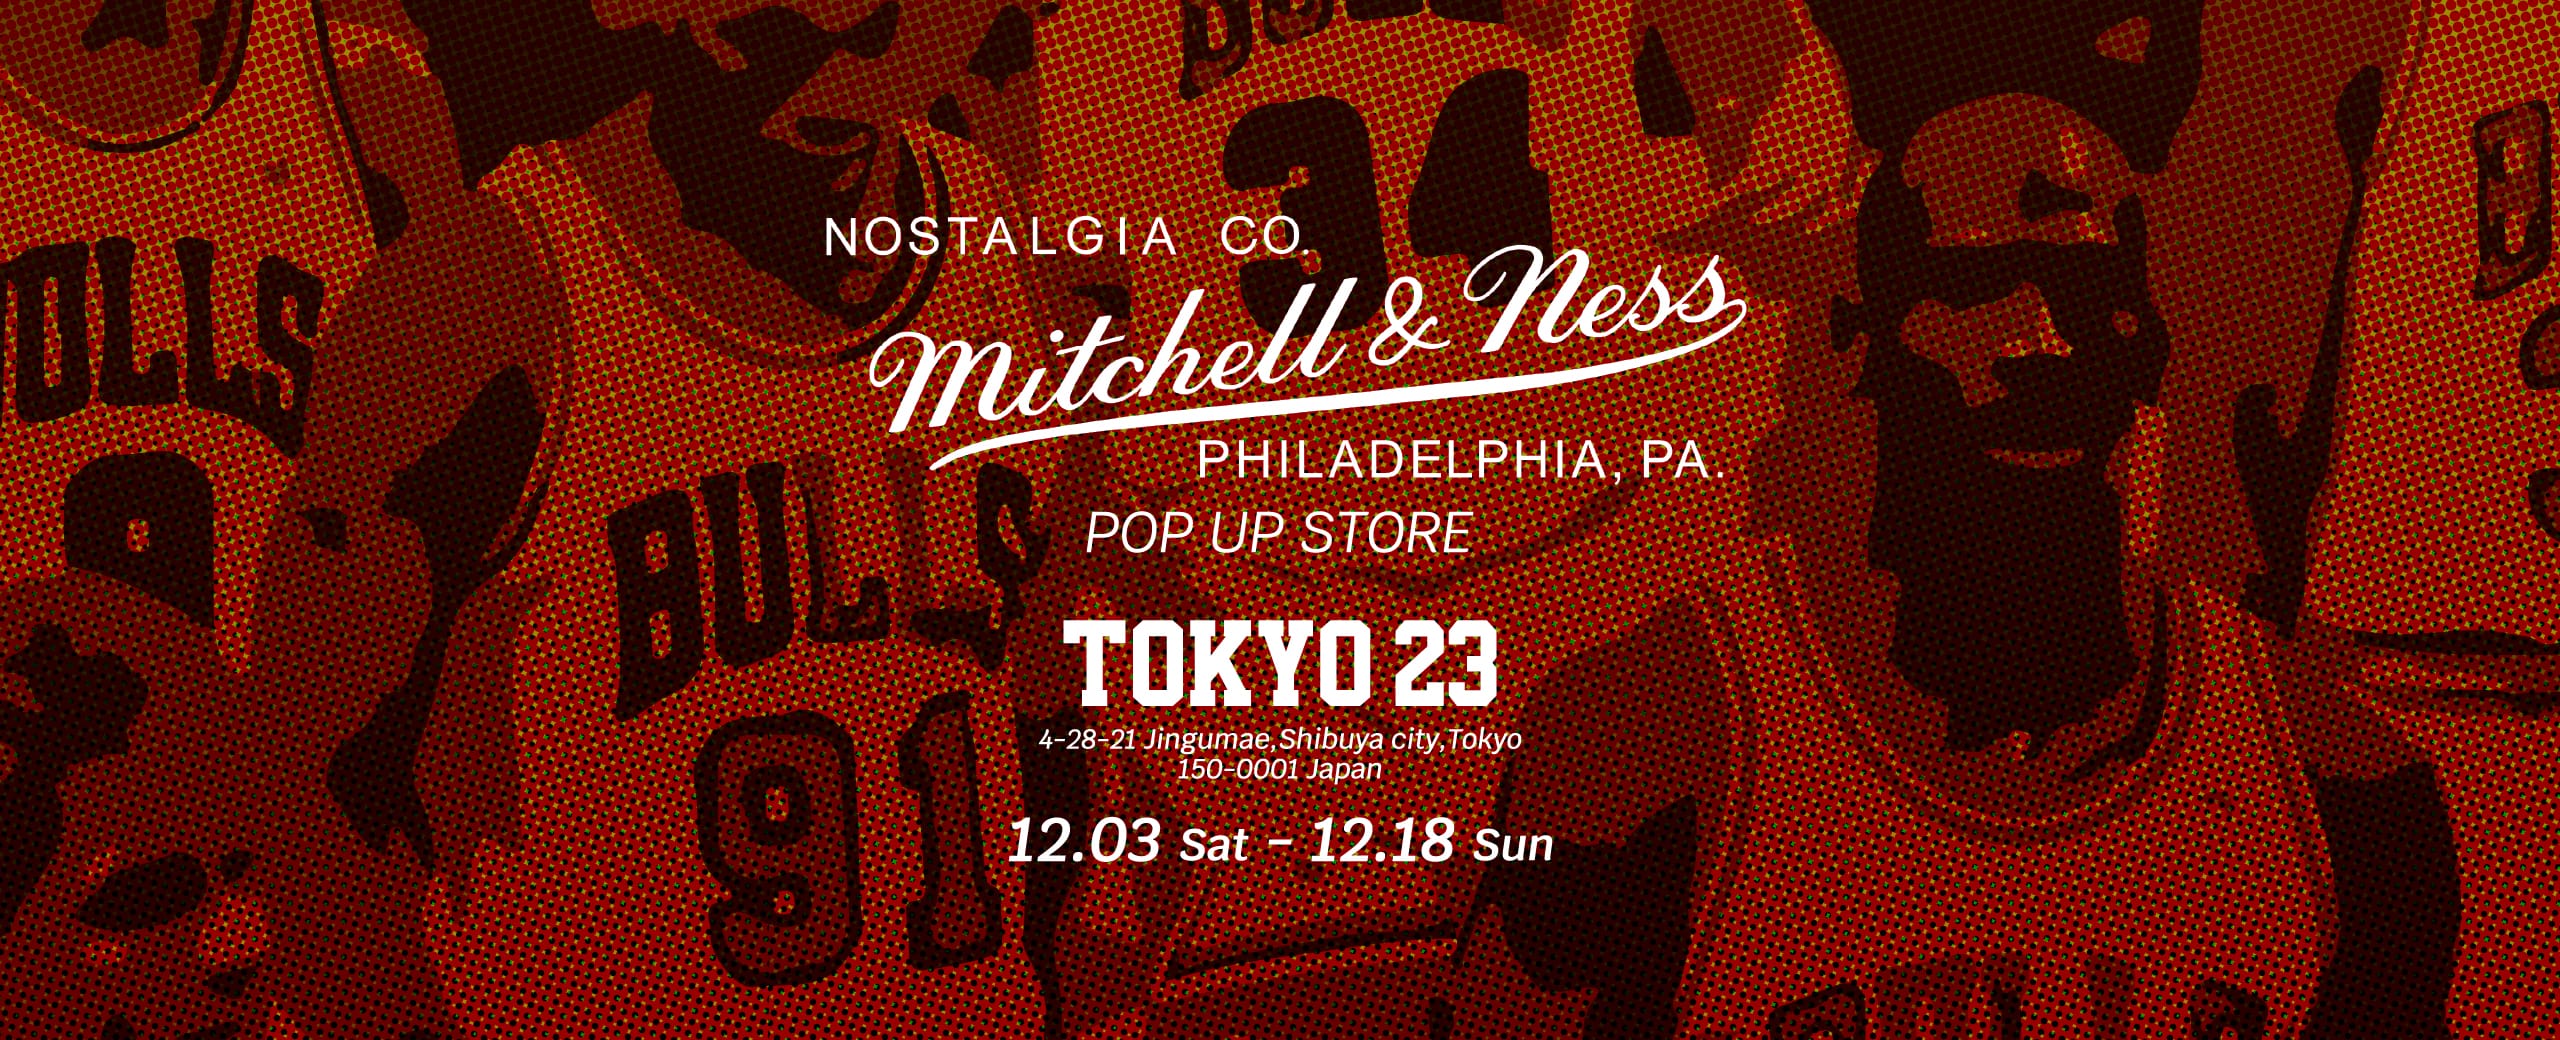 "Mitchell and Ness POP UP STORE"